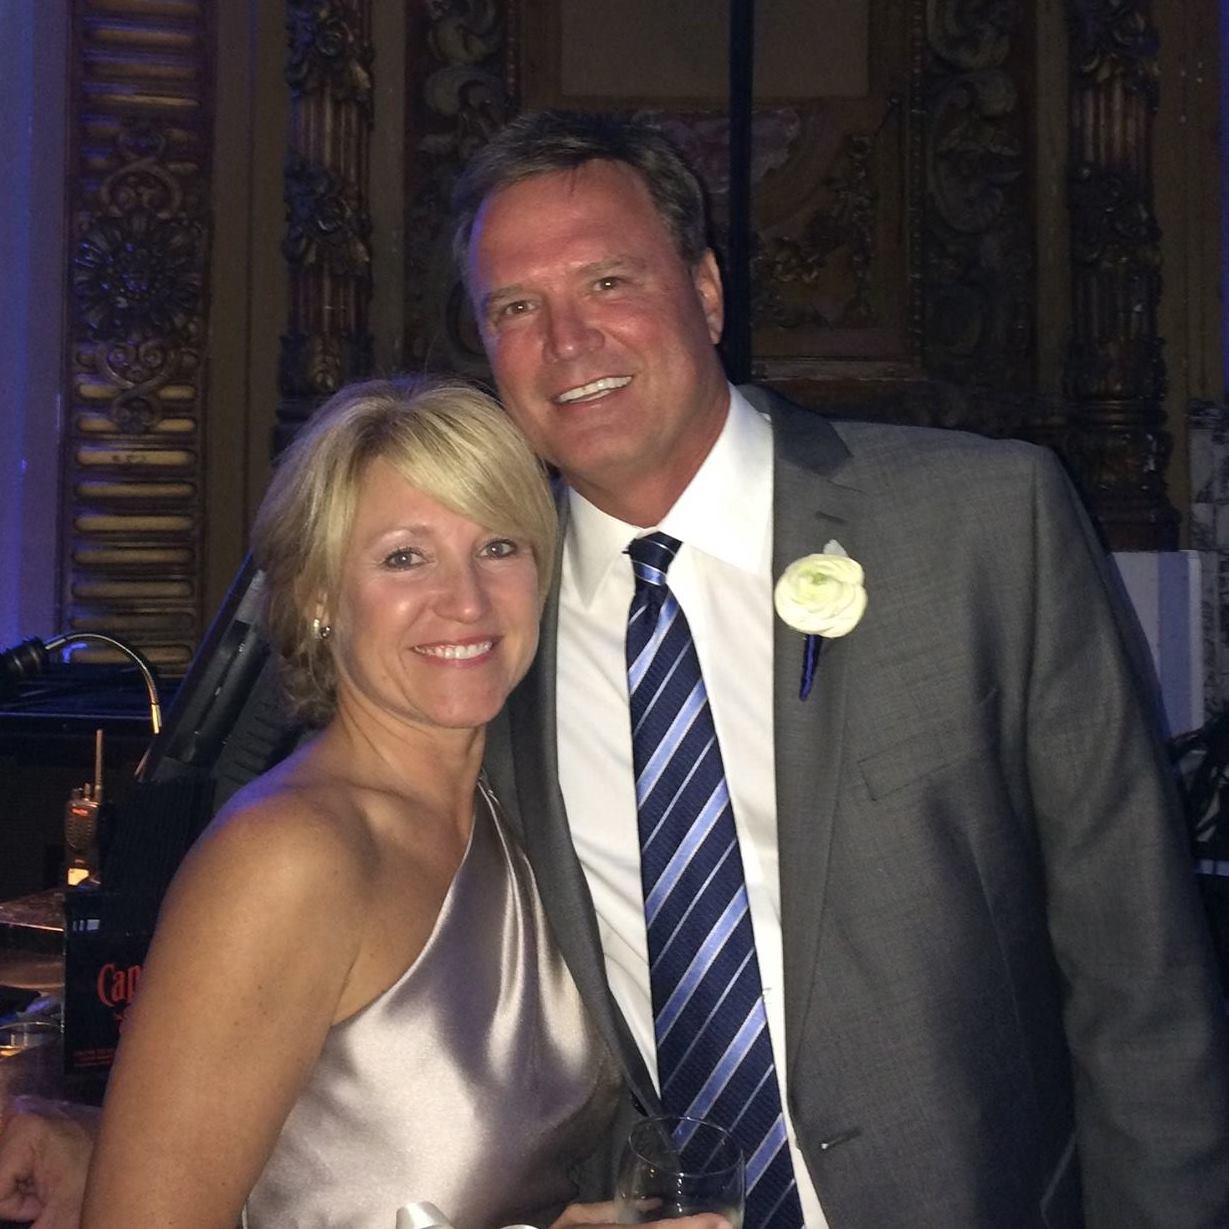 Bill Self with his wife, Cindy Self.